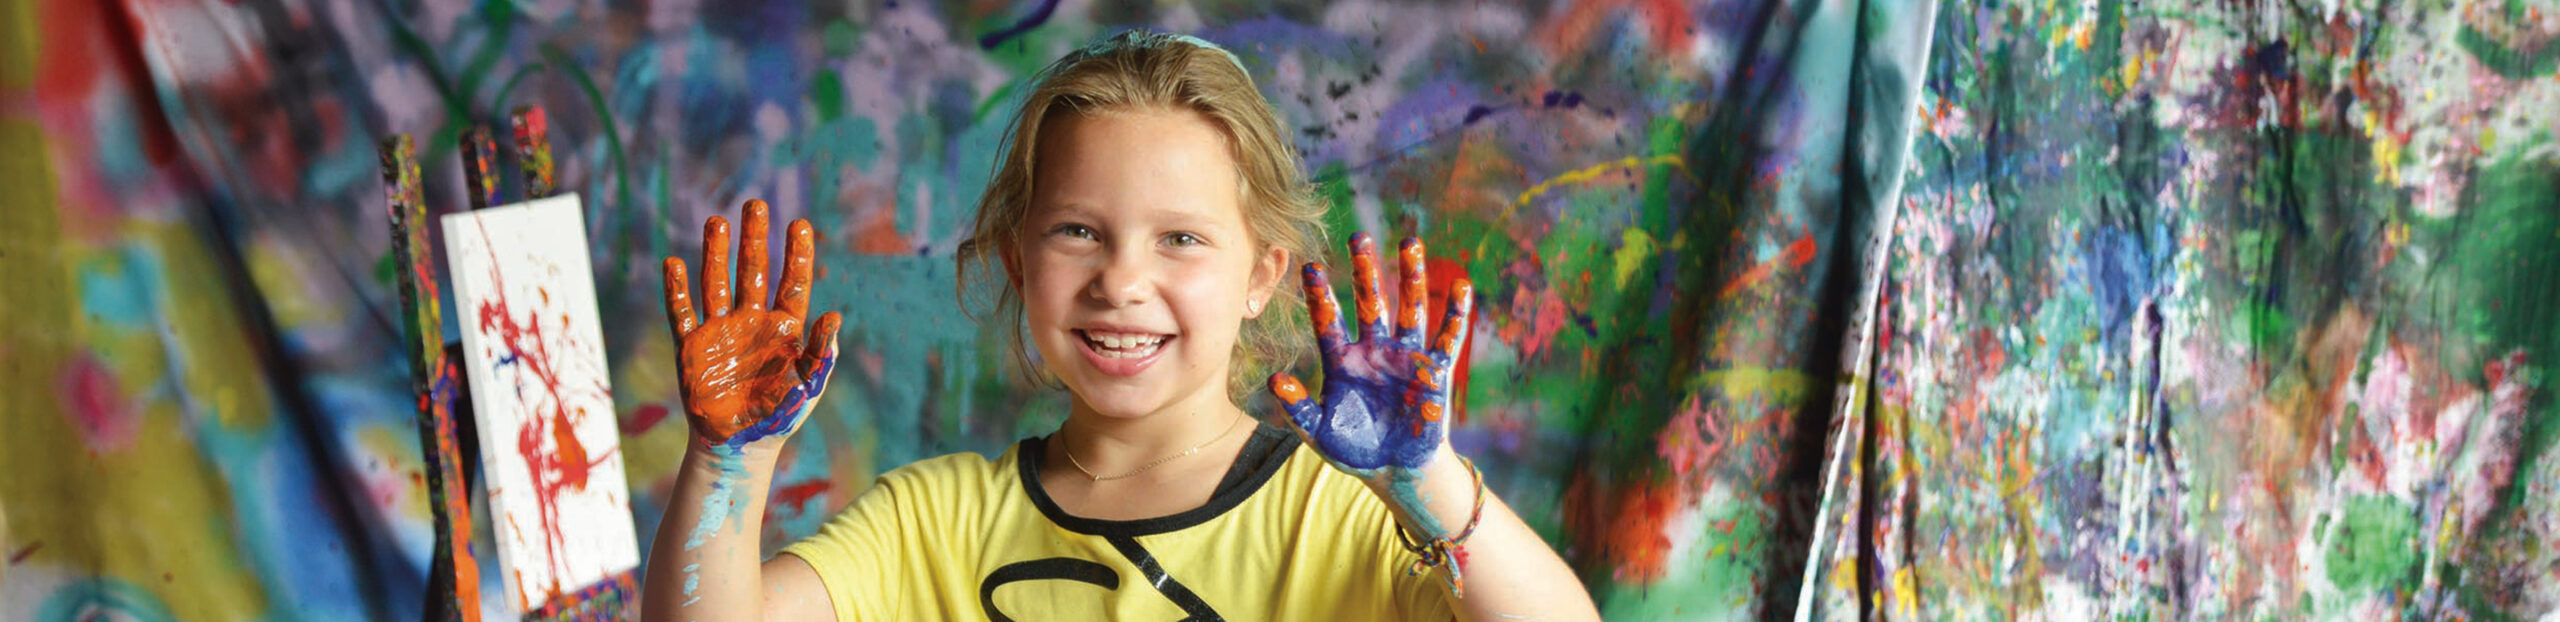 girl showing messy hands